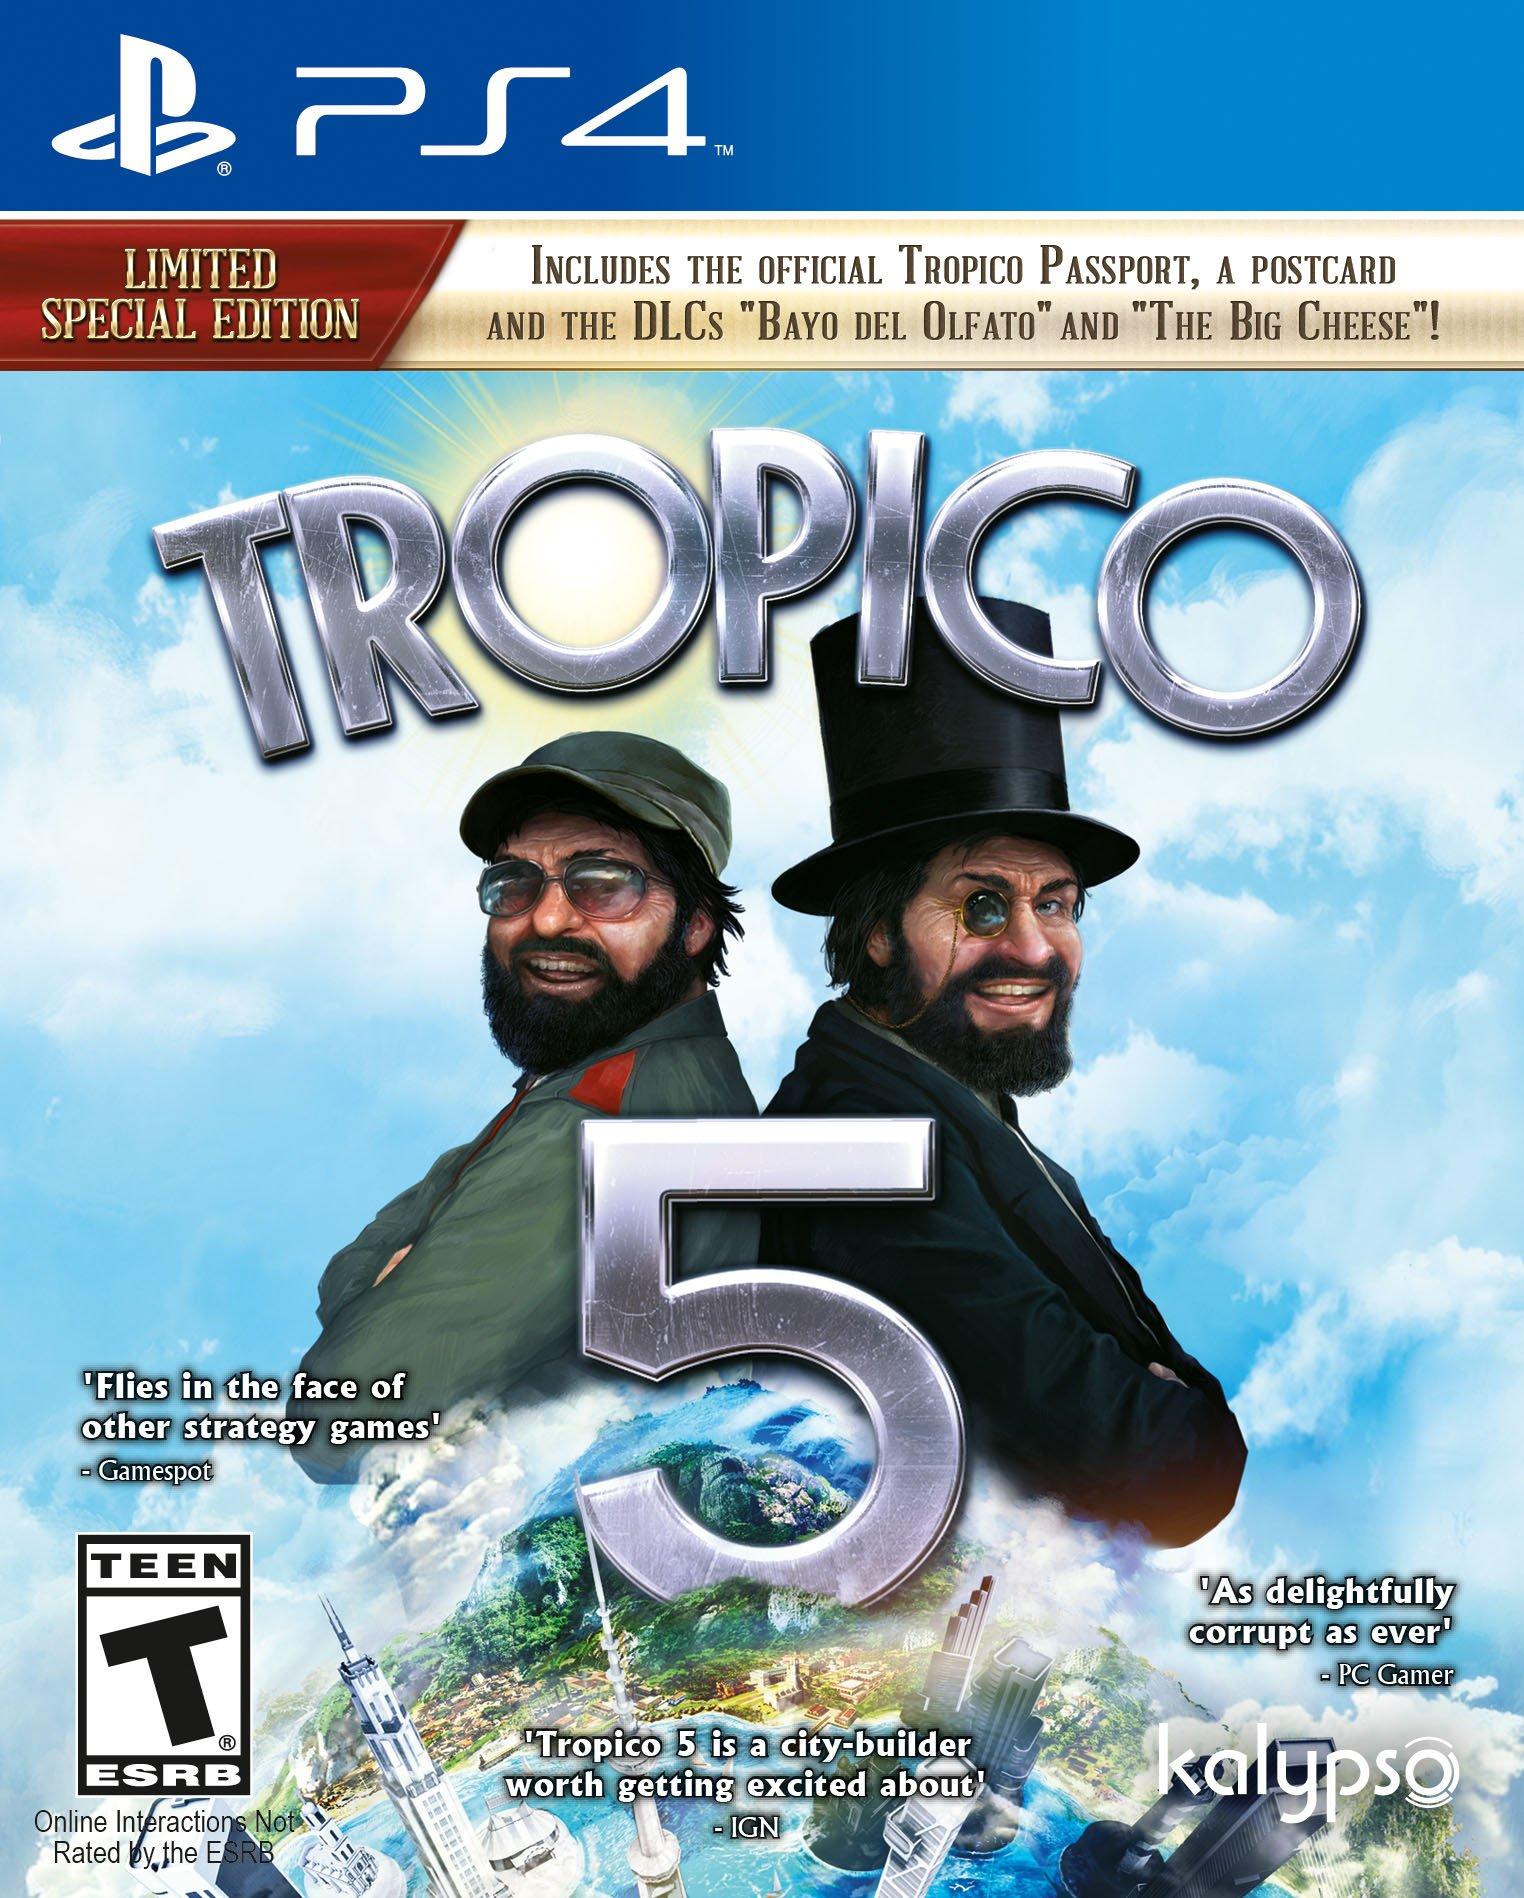 Tropico 5 Complete Collection - Xbox One